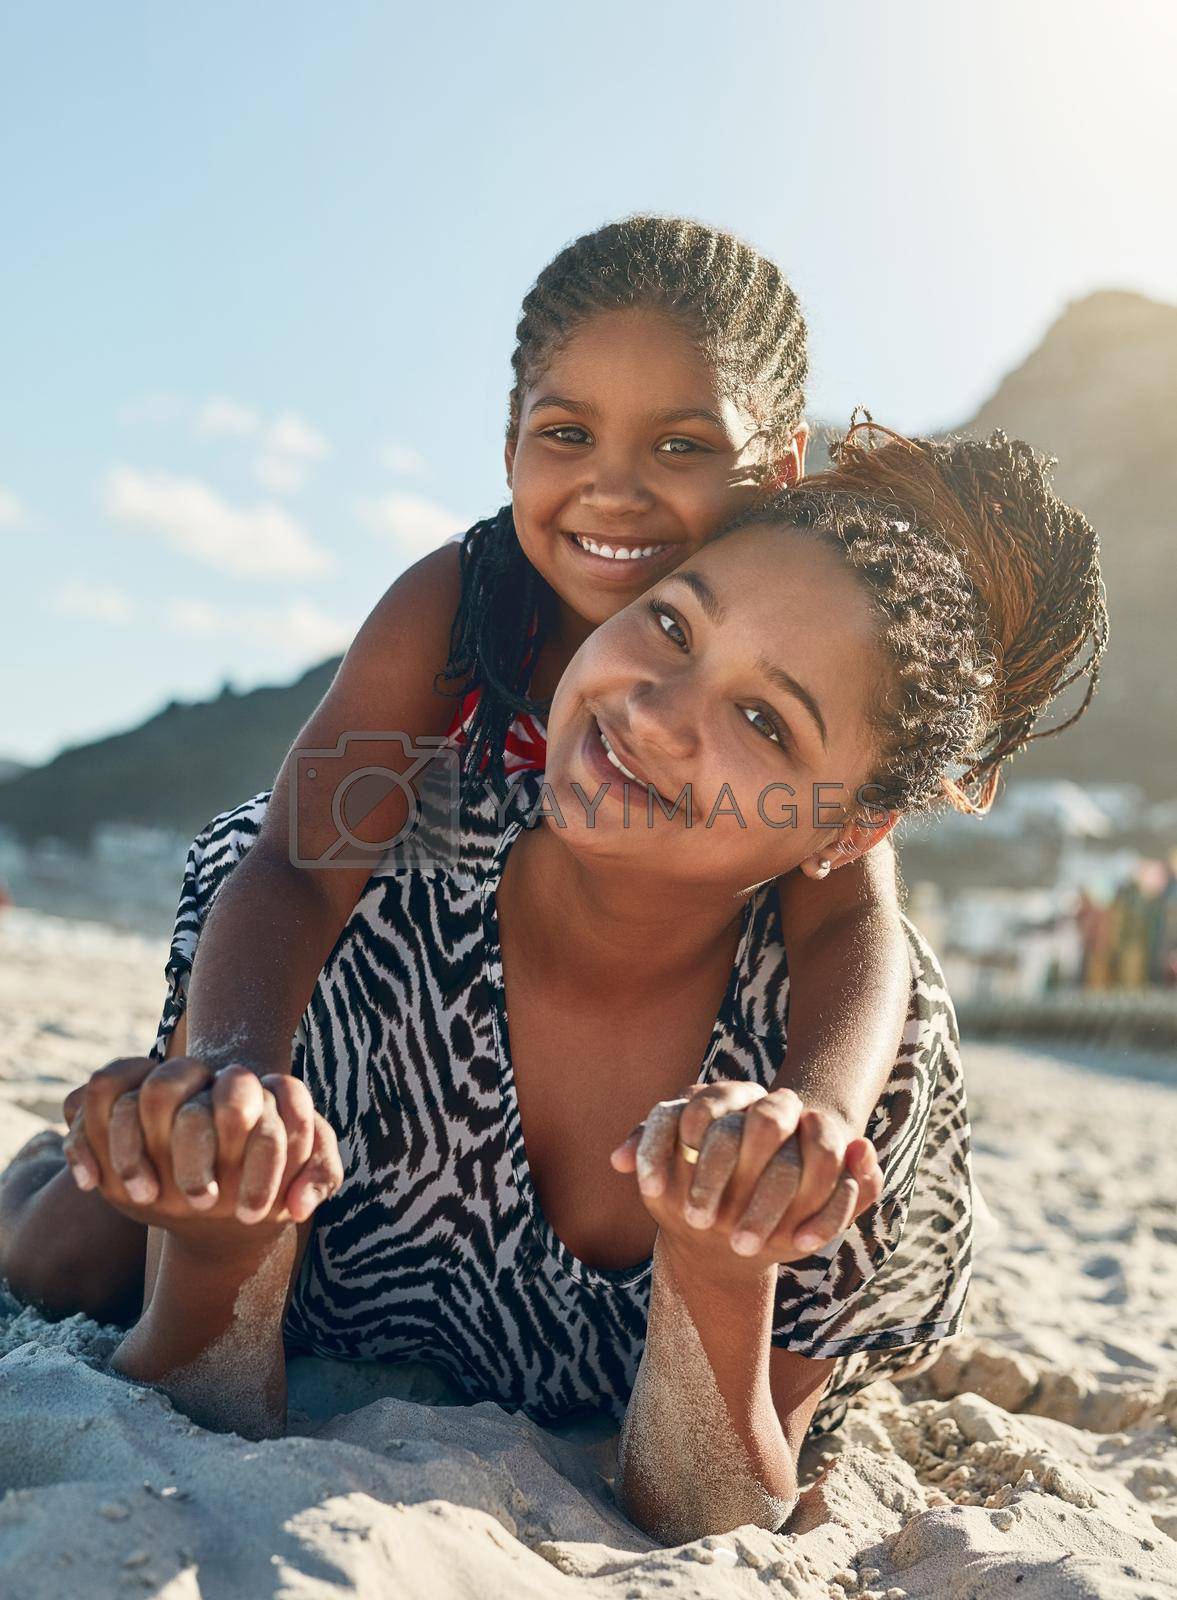 Portrait of a mother and her little daughter enjoying some quality time together at the beach.